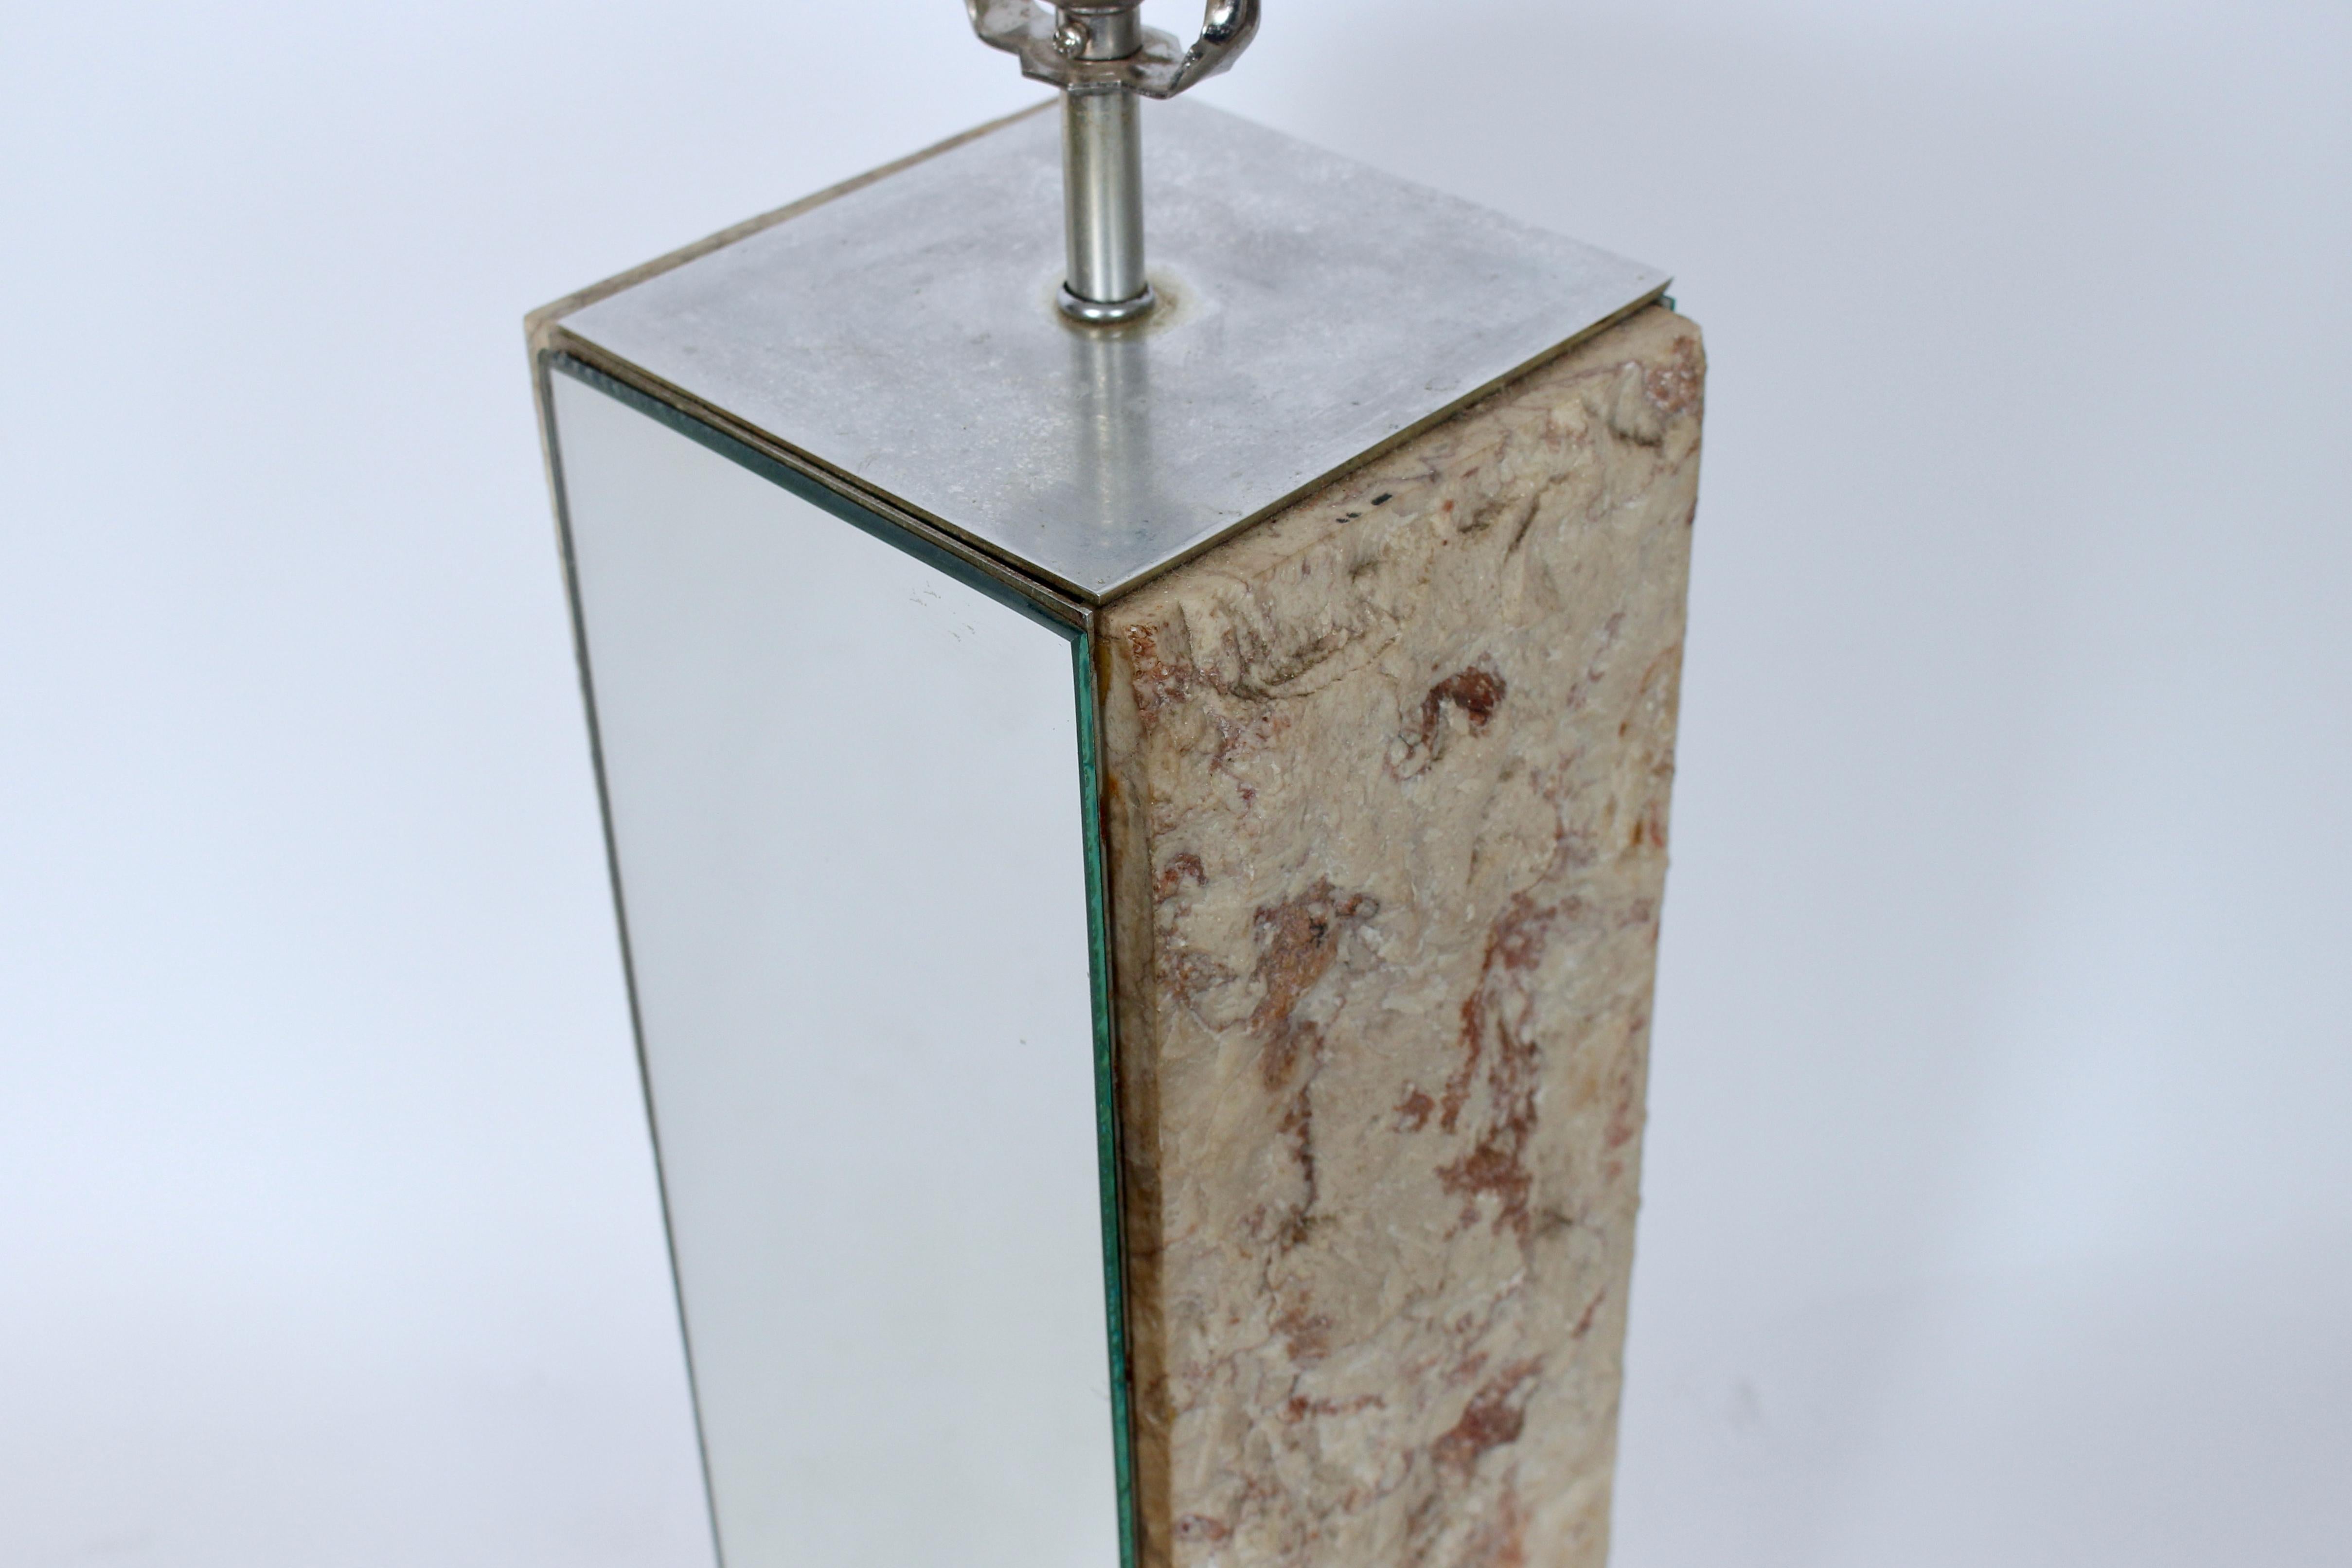 Substantial Laurel Lamp Co. Travertine and Mirror Table Lamp, 1960s For Sale 5